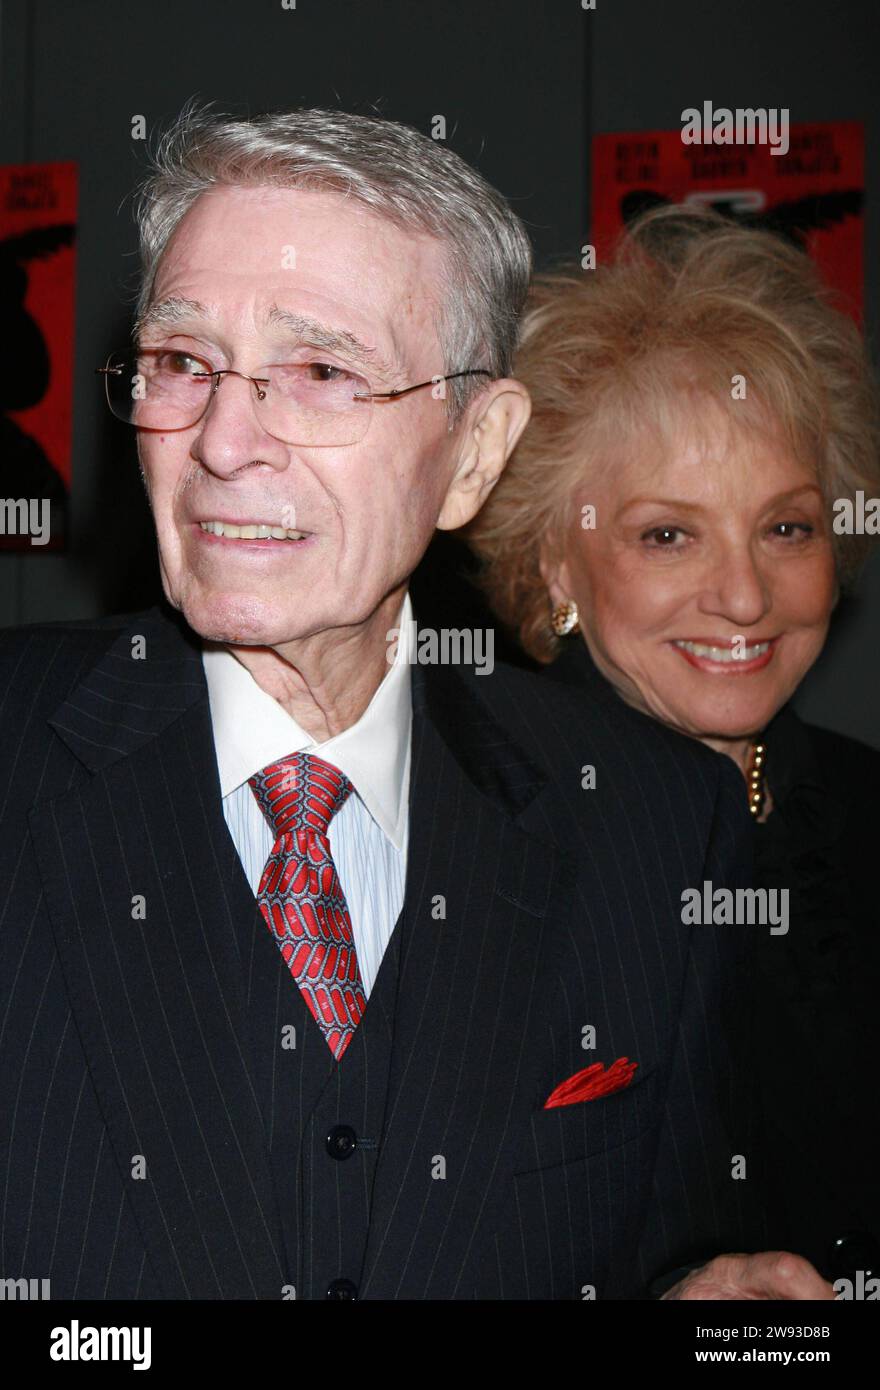 **FILE PHOTO** Selma Archerd Has Passed Away. Army Archerd and Selma Archerd attend the opening night performance of the new production of Cyrano de Bergerac at the Richard Rogers Theatre in New York City on November 1, 2007. Photo Copyright: xHenryxMcGeex Stock Photo